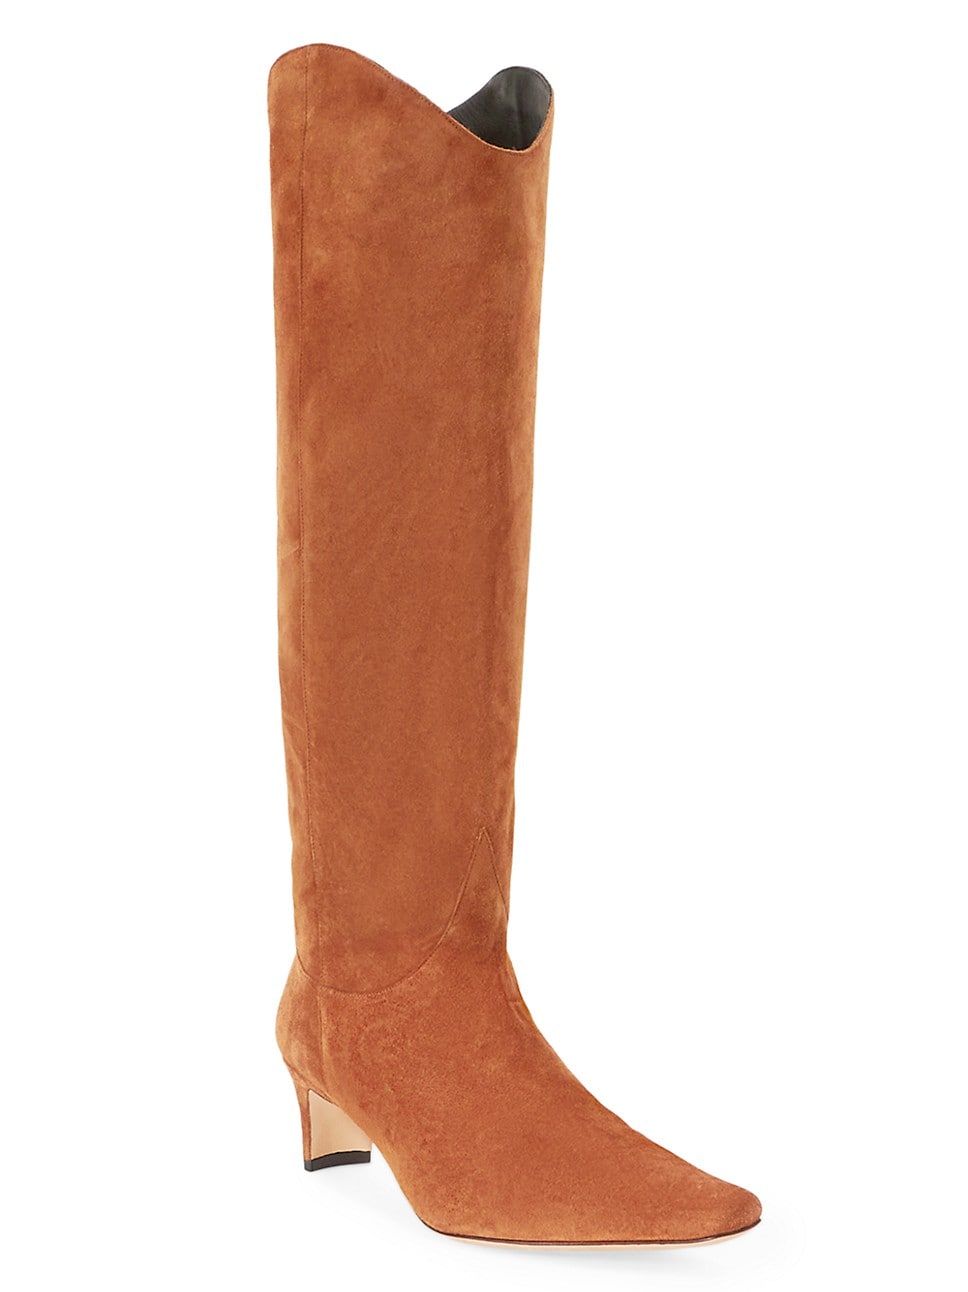 Western Suede Wally Boots | Saks Fifth Avenue